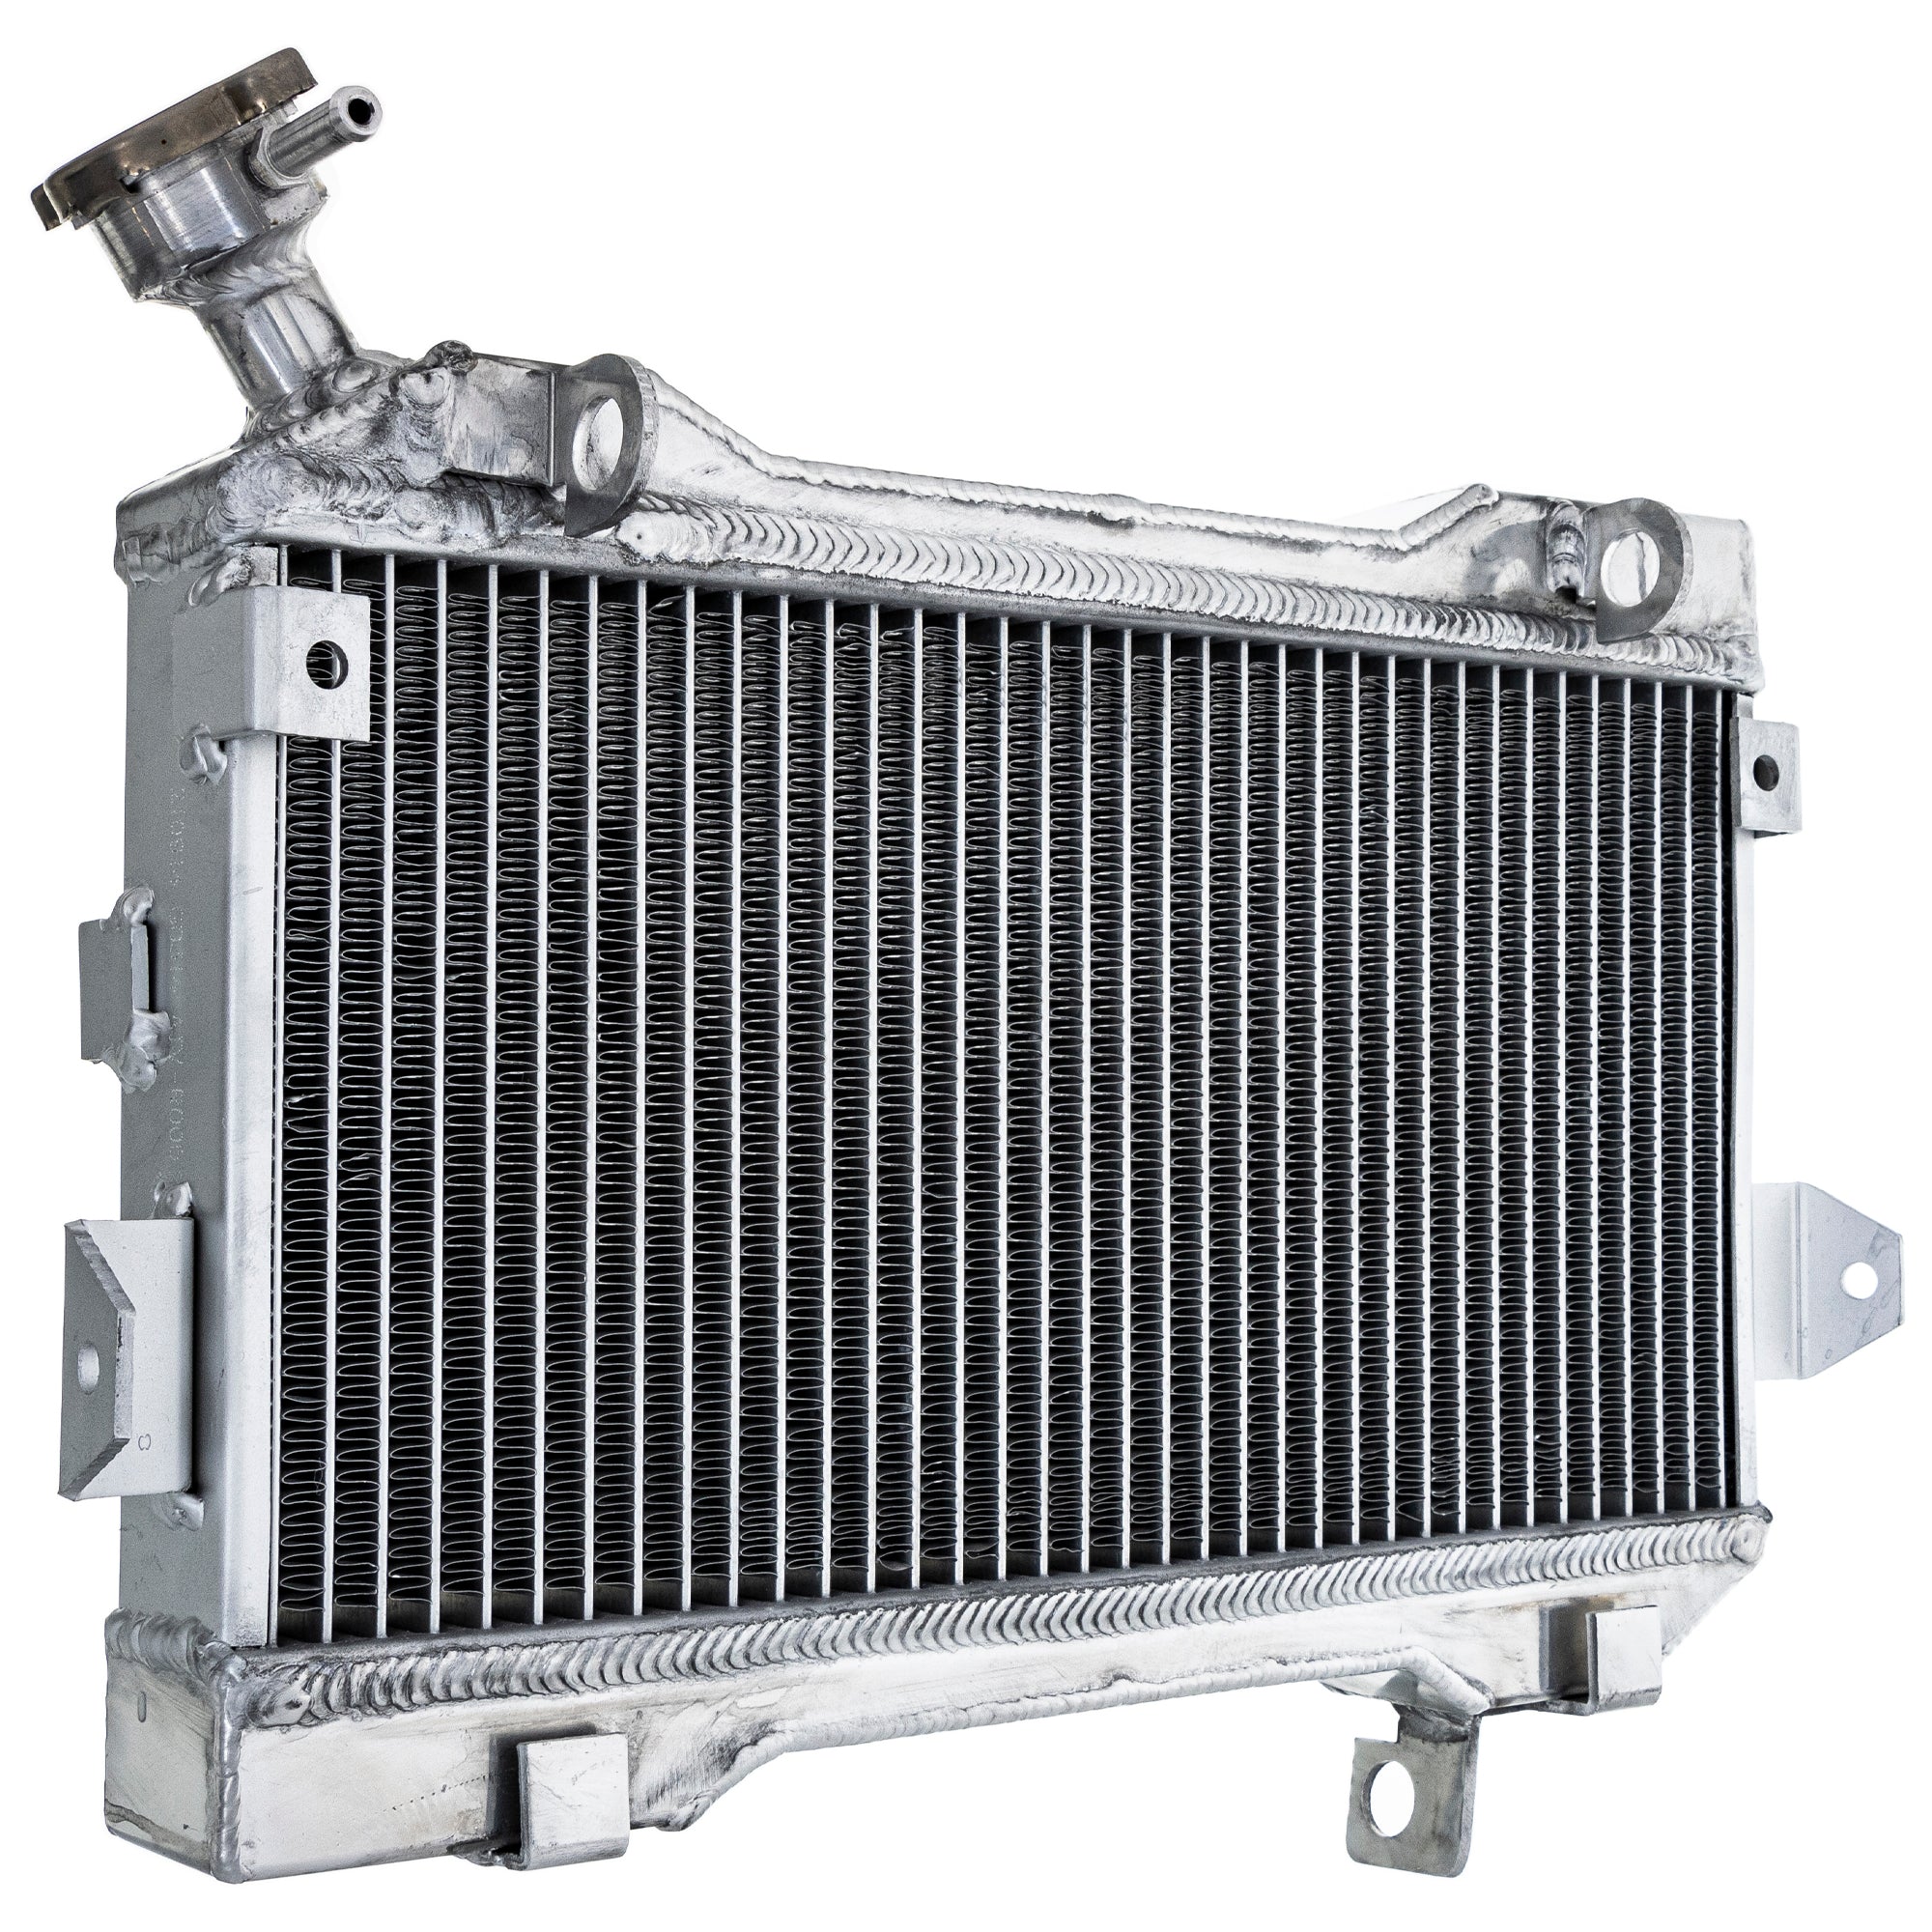 NICHE 519-CRD2238A High Capacity Radiator for zOTHER